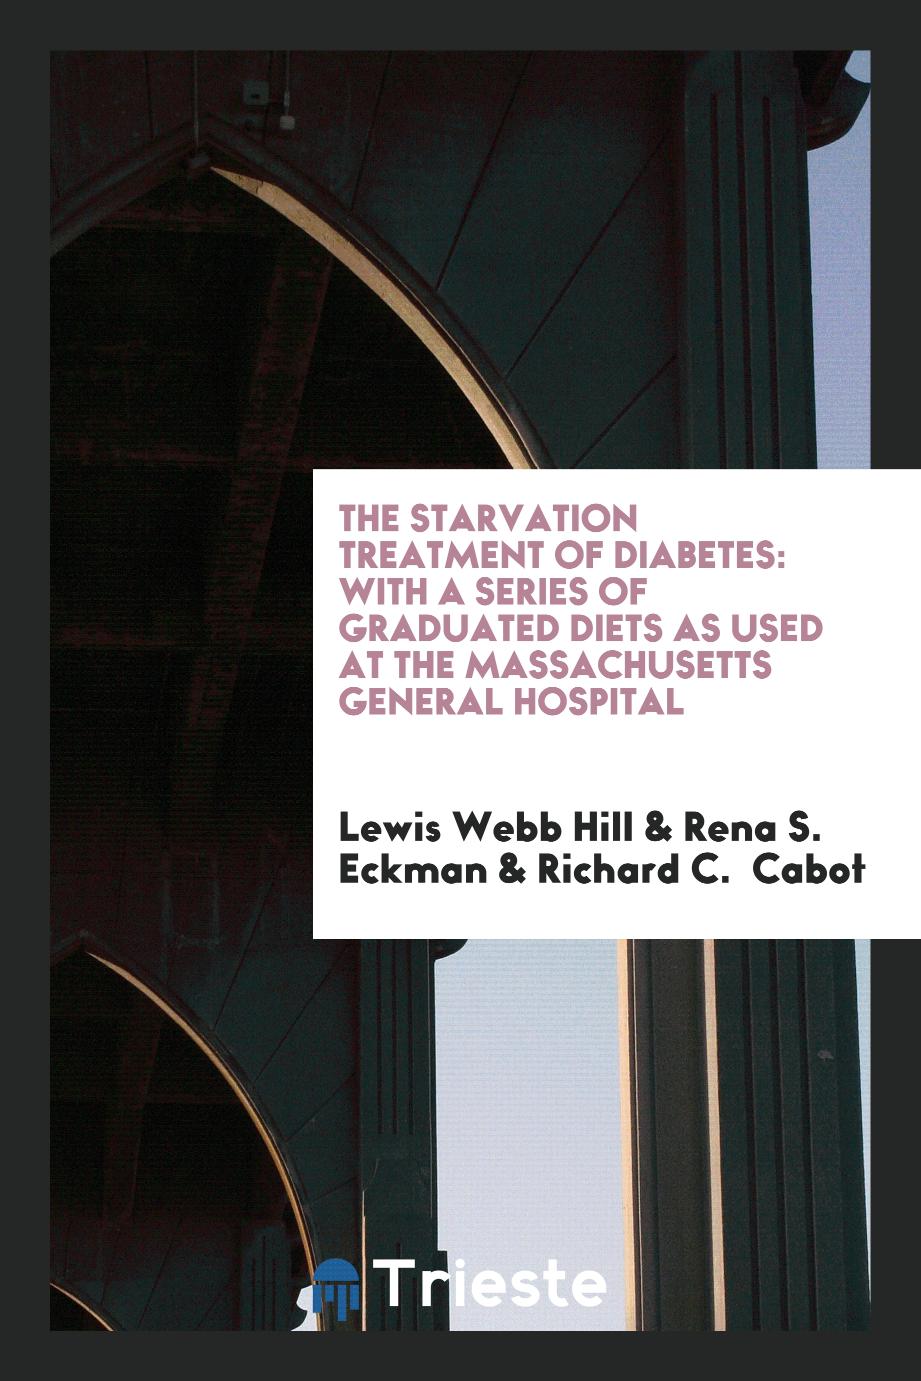 The Starvation Treatment of Diabetes: With a Series of Graduated Diets as Used at the Massachusetts General Hospital